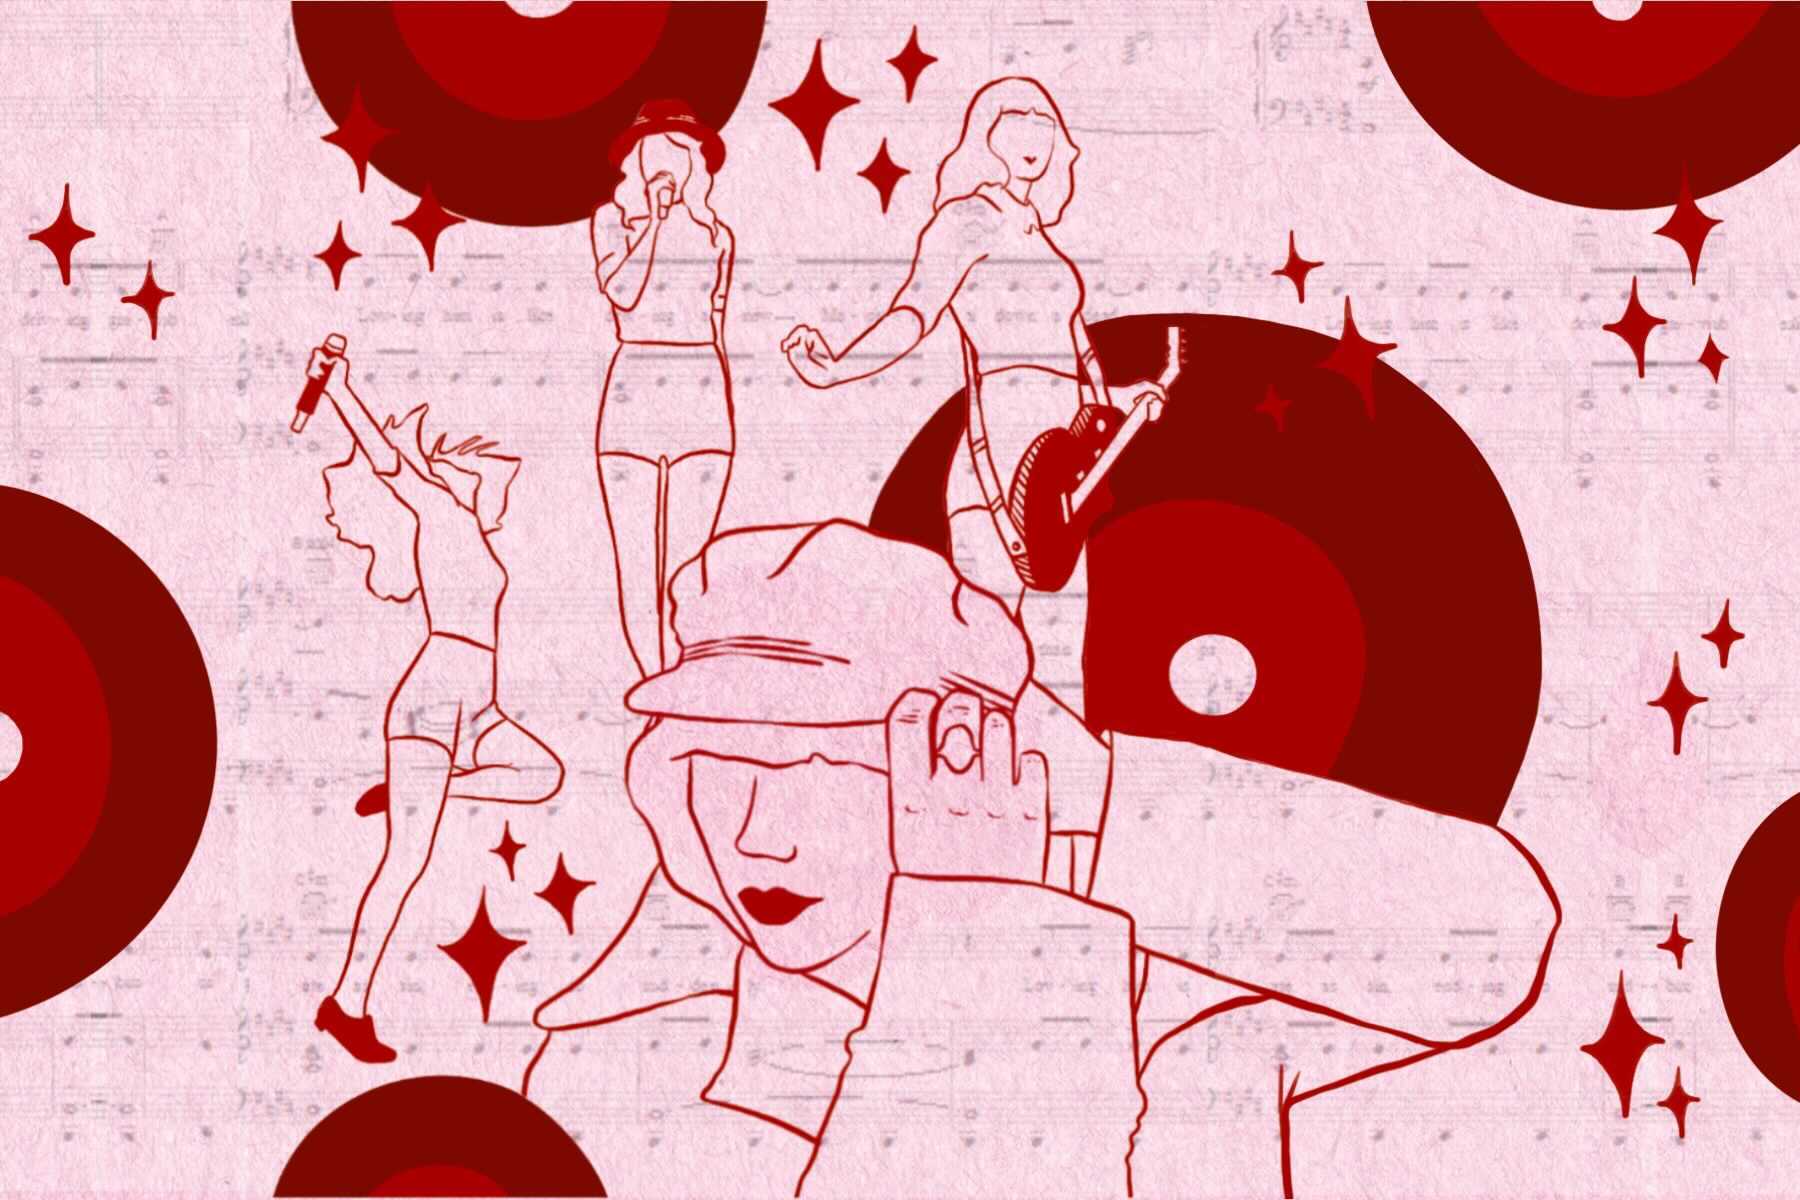 An illustration of several people dancing in front of a record player. - Taylor Swift